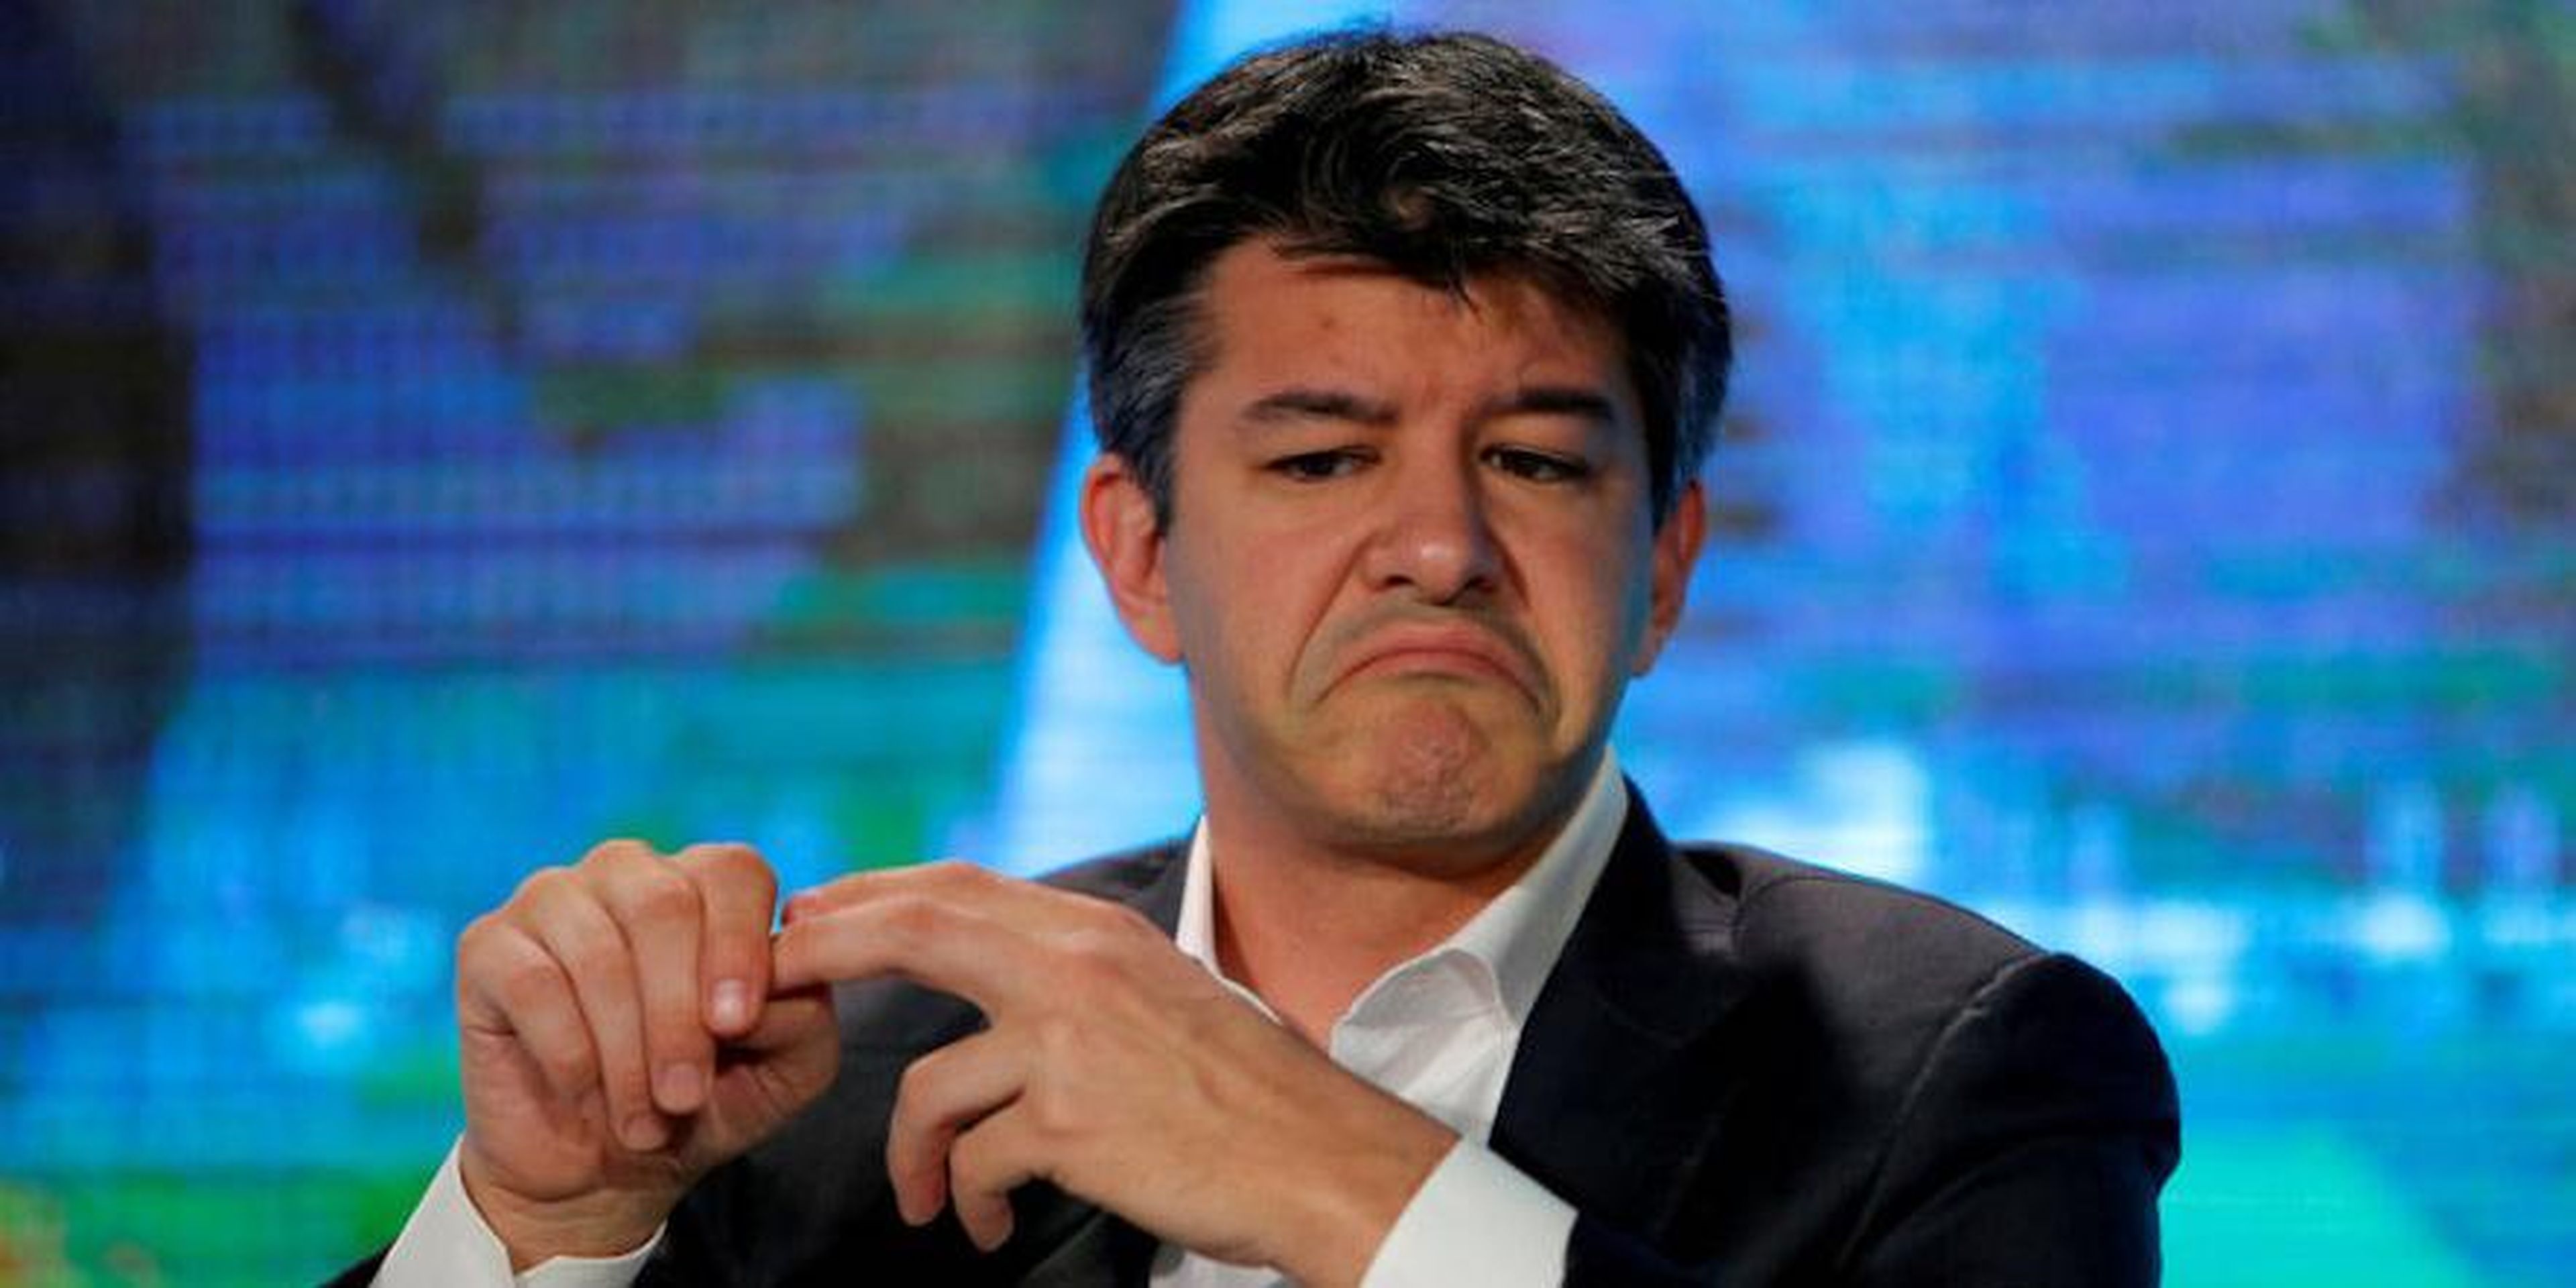 The lavish lifestyle that followed Kalanick's sudden rise to millionaire status in the late 2000s also helped foster the idea for creating Uber. He and his friends spent $800 on a private driver one New Year's — so he started